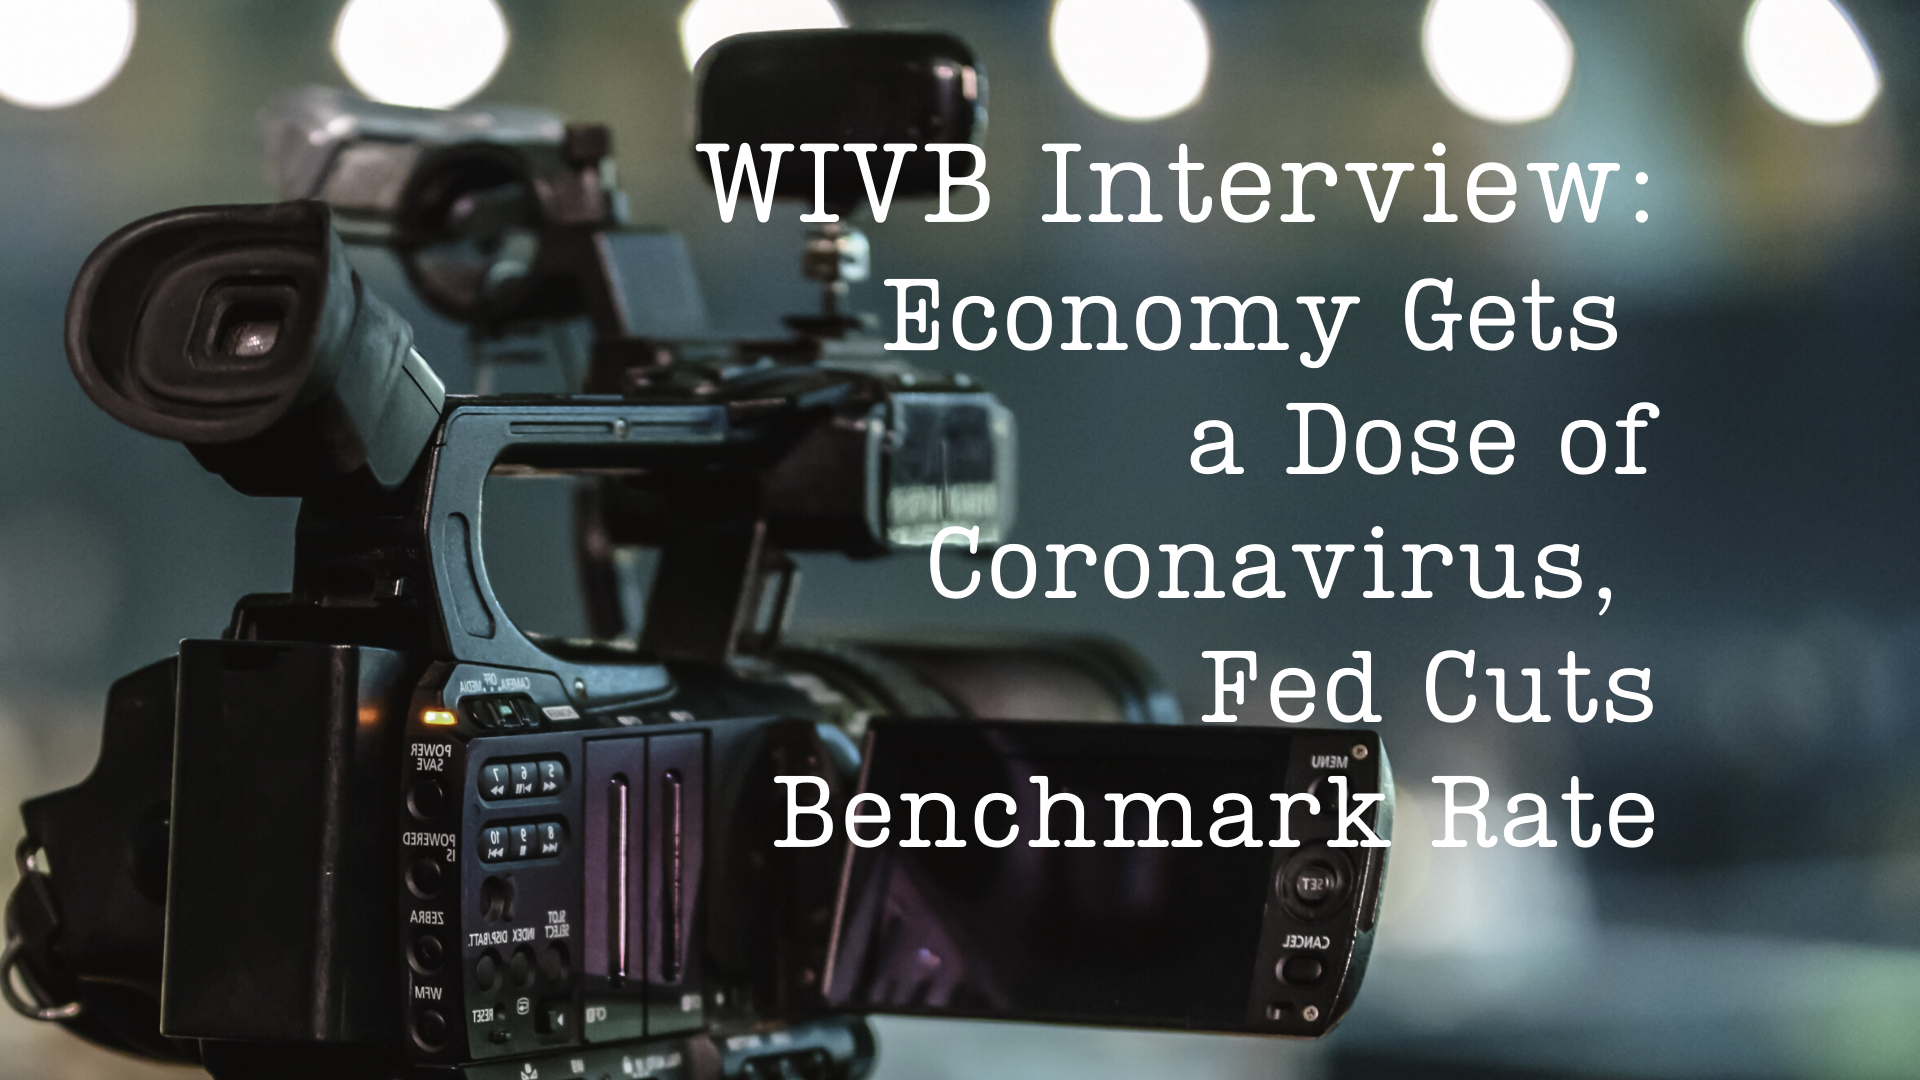 WIVB: Economy Gets a Dose of Coronavirus, Fed Cuts Benchmark Rate